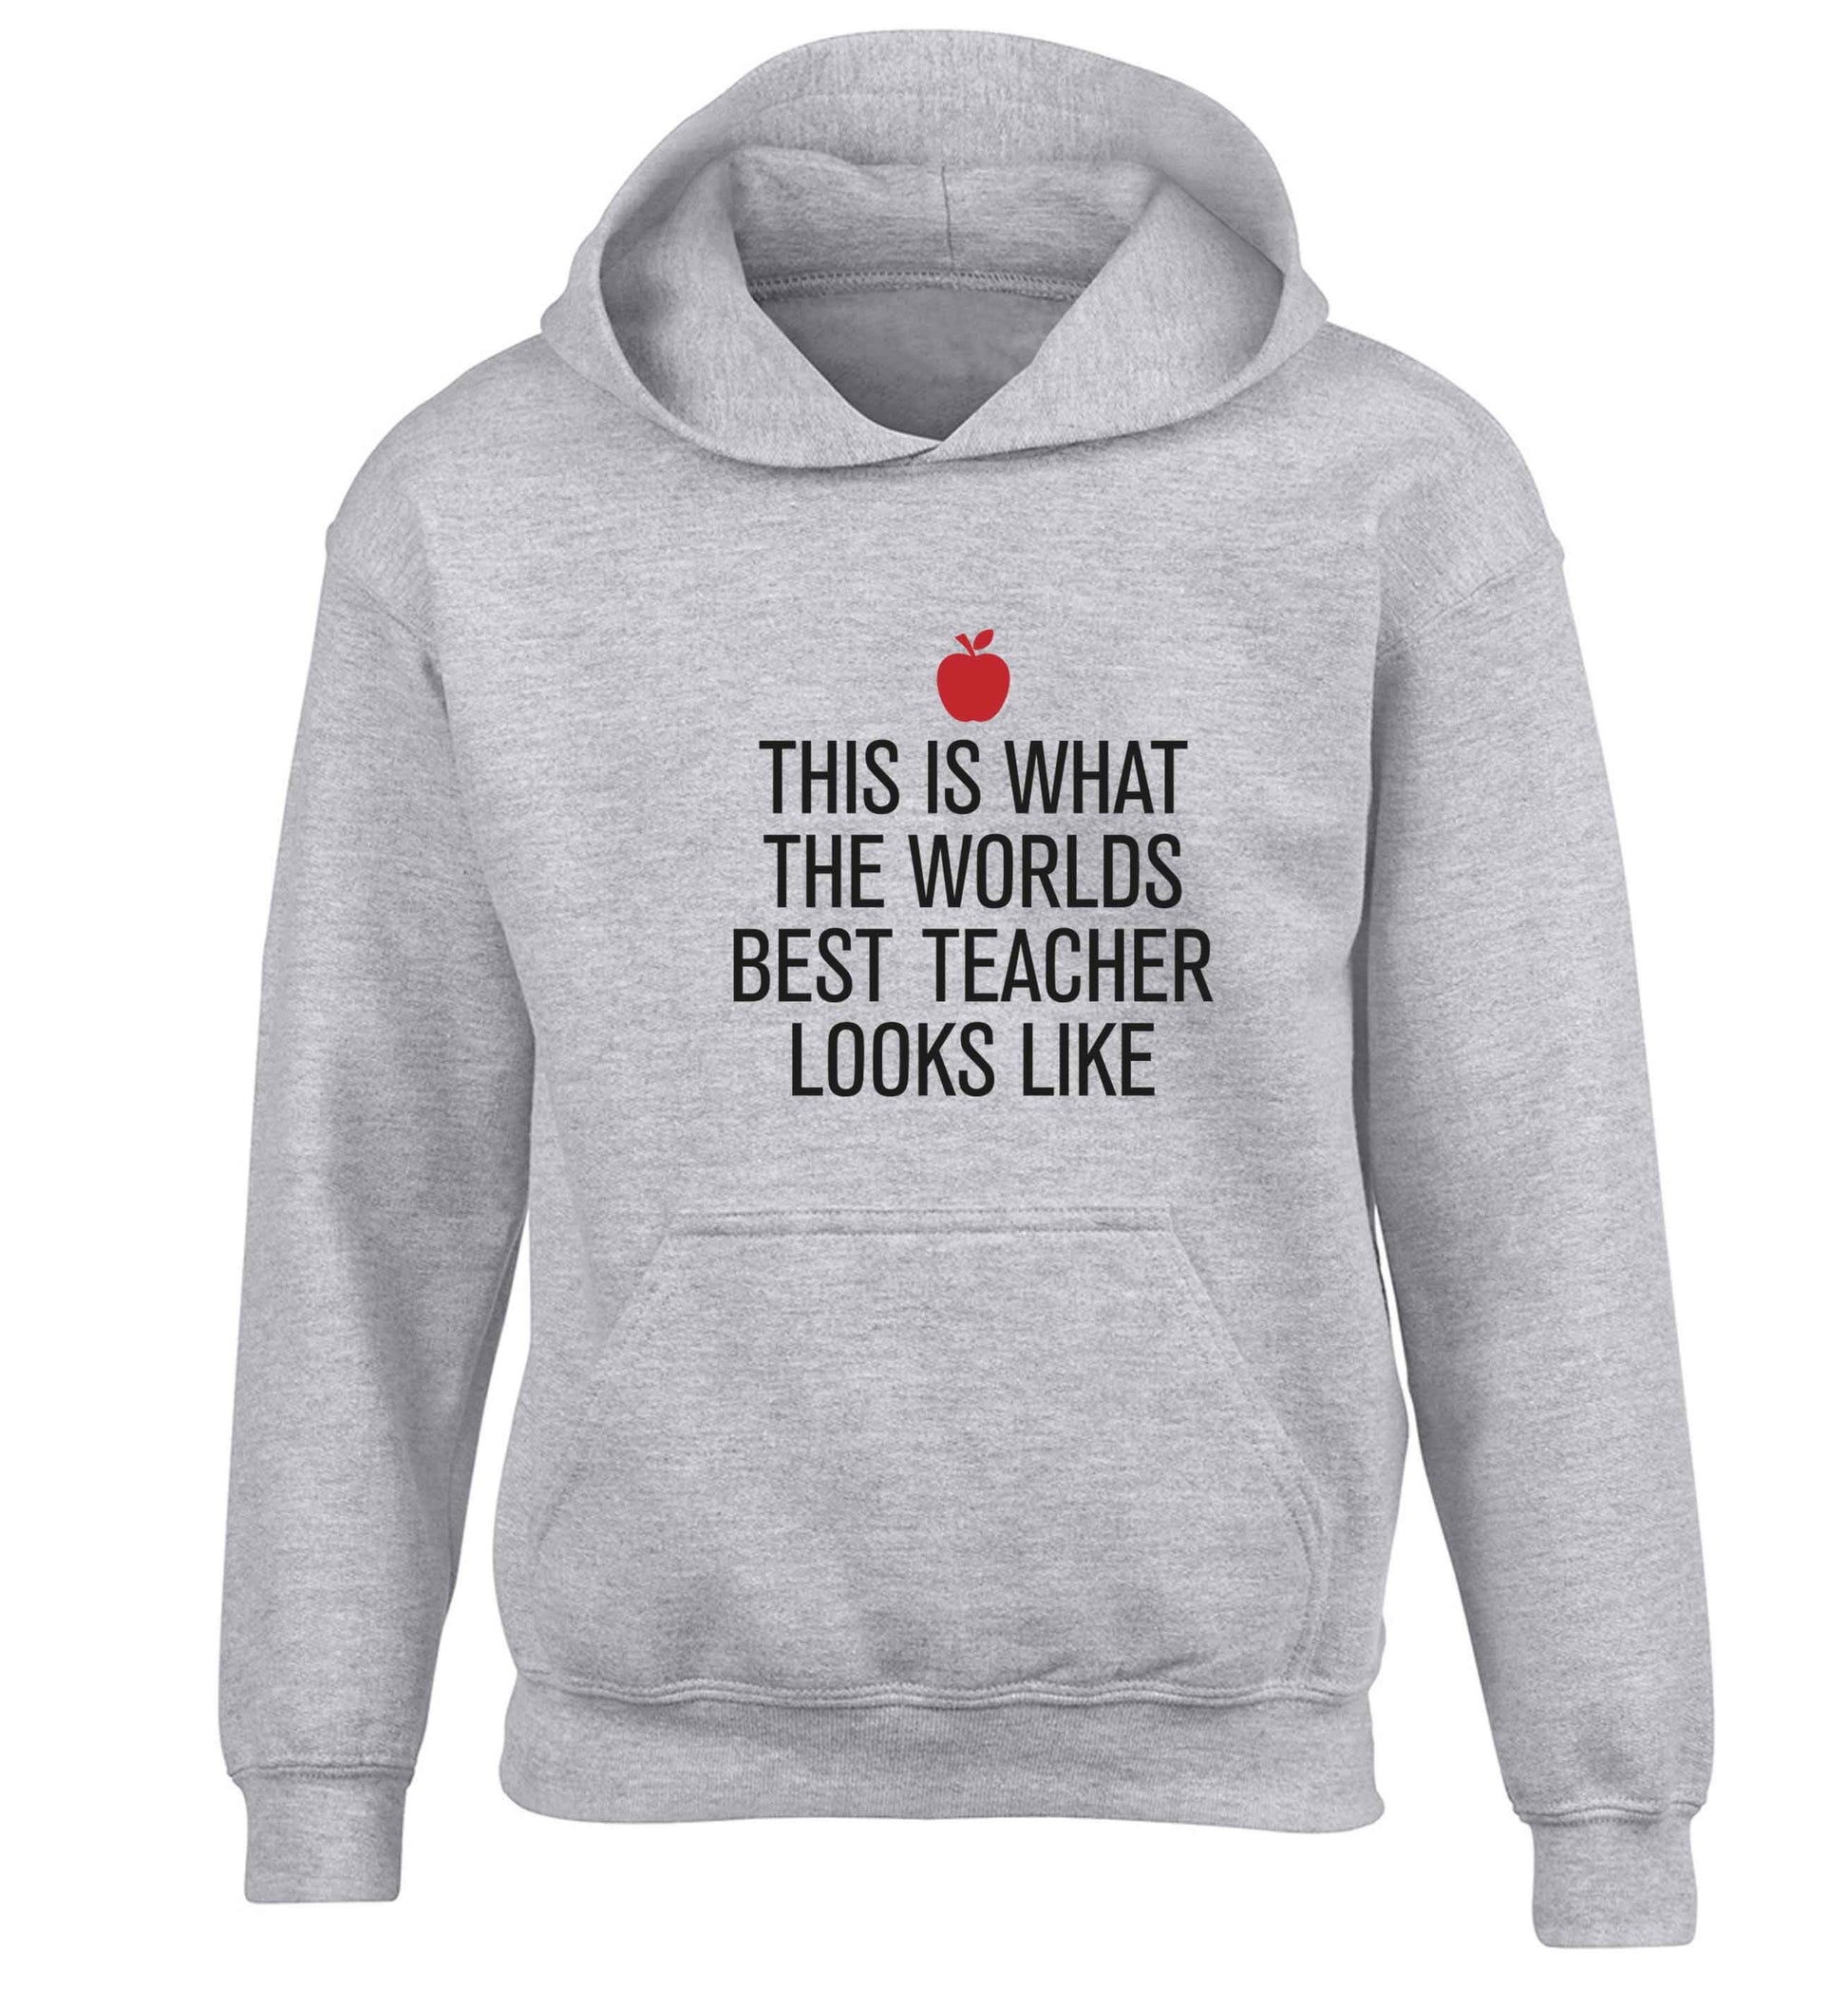 This is what the worlds best teacher looks like children's grey hoodie 12-13 Years